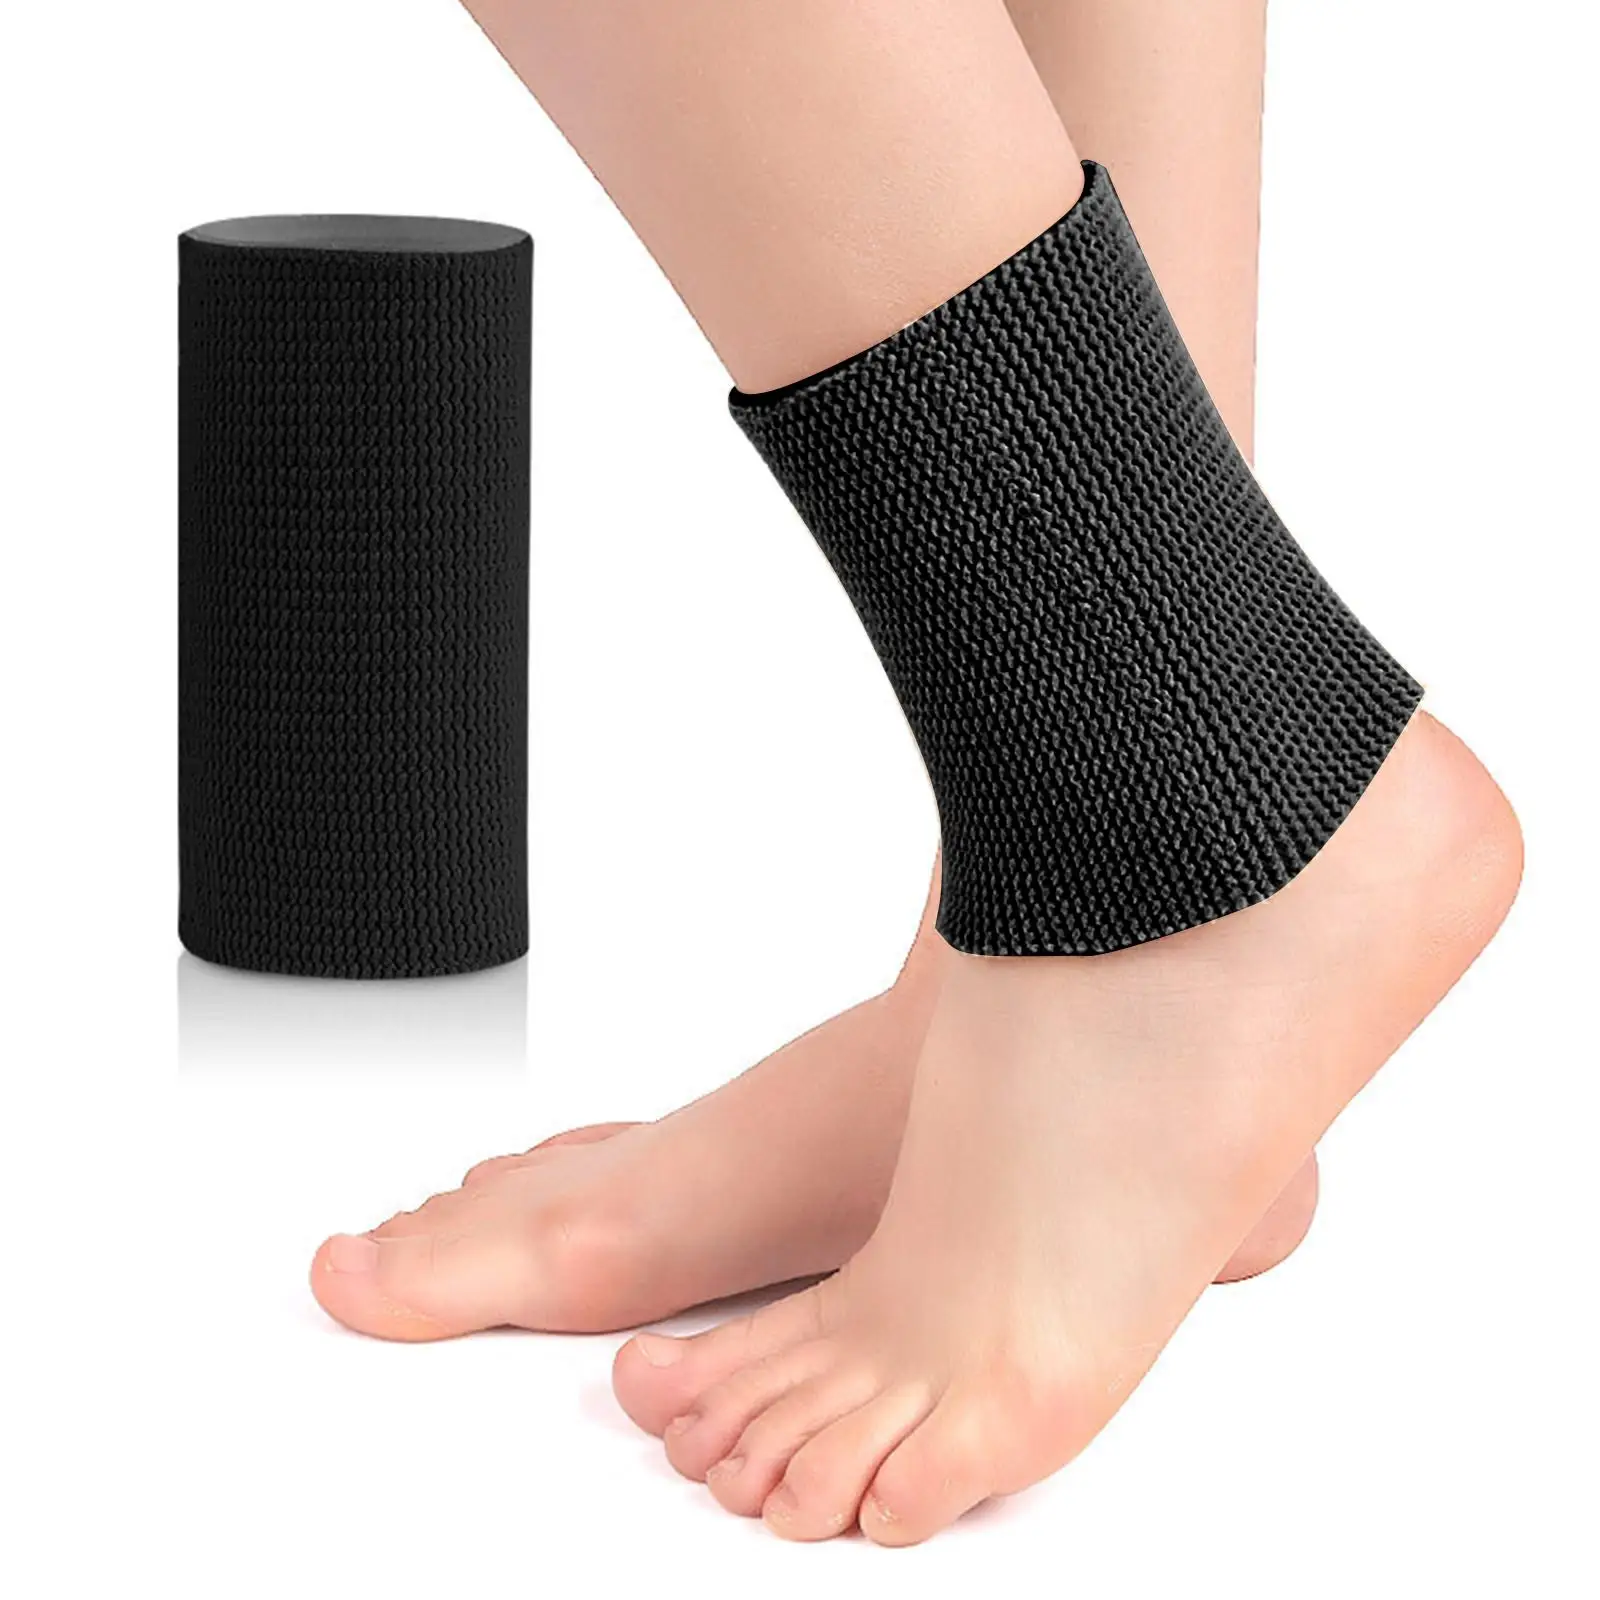 Ankle Brace Sleeve Comfortable Soft Elastic for Volleyball Football Soccer